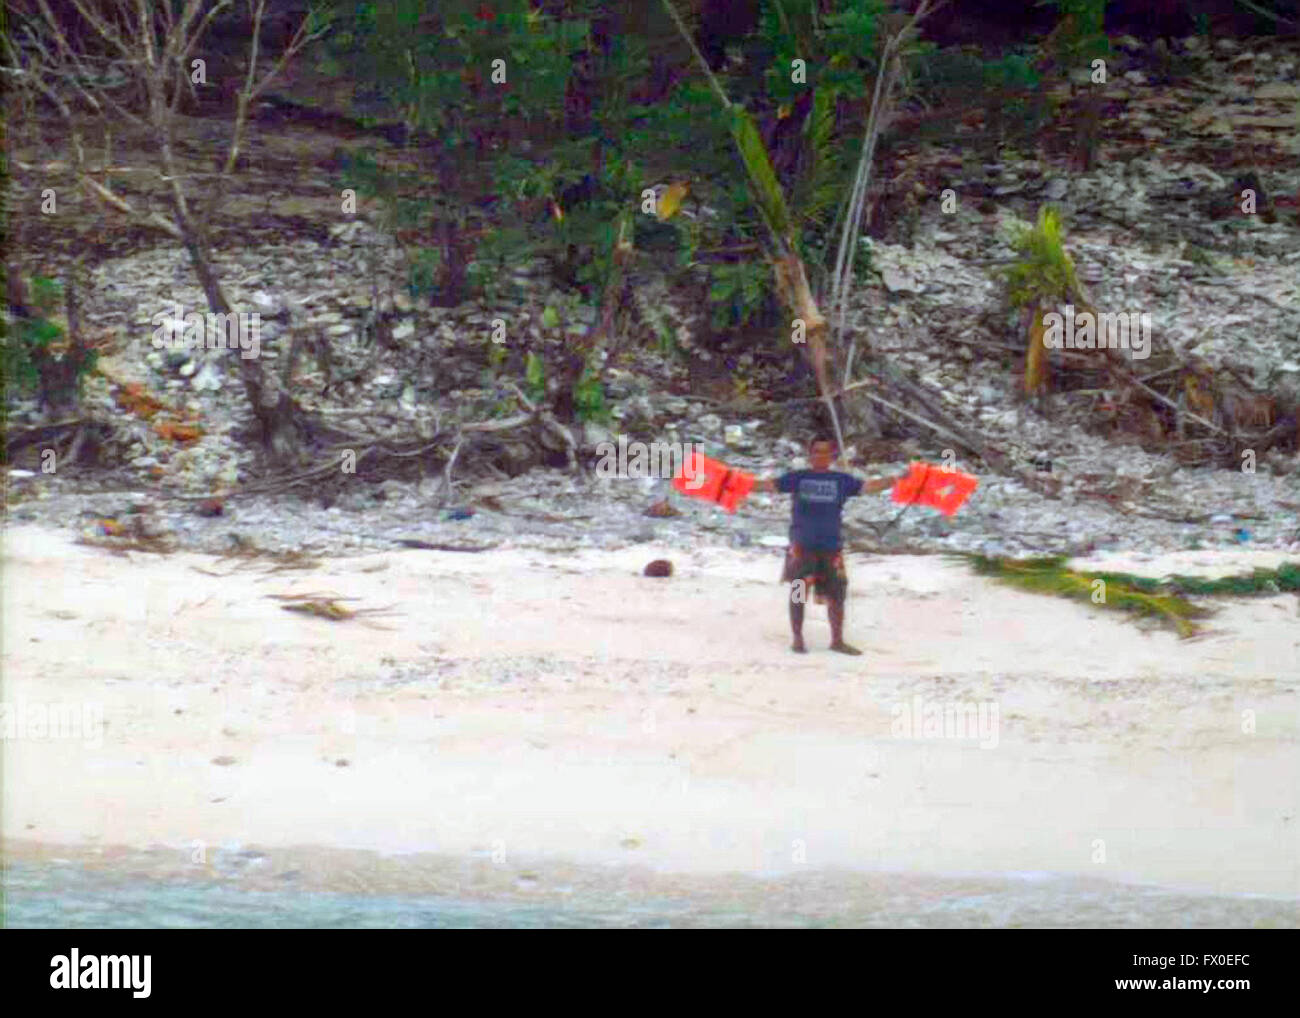 Three men are rescued from the uninhabited island of Fandadik after being located by a Navy aircraft waving life jackets next to a help sign made of palm fronds on the beach April 8, 2016 in Fanadik, Federated States of Micronesia. The men's 19-foot skiff capsized after setting out to sea and spent the night swimming until they arrived at the deserted island. Stock Photo